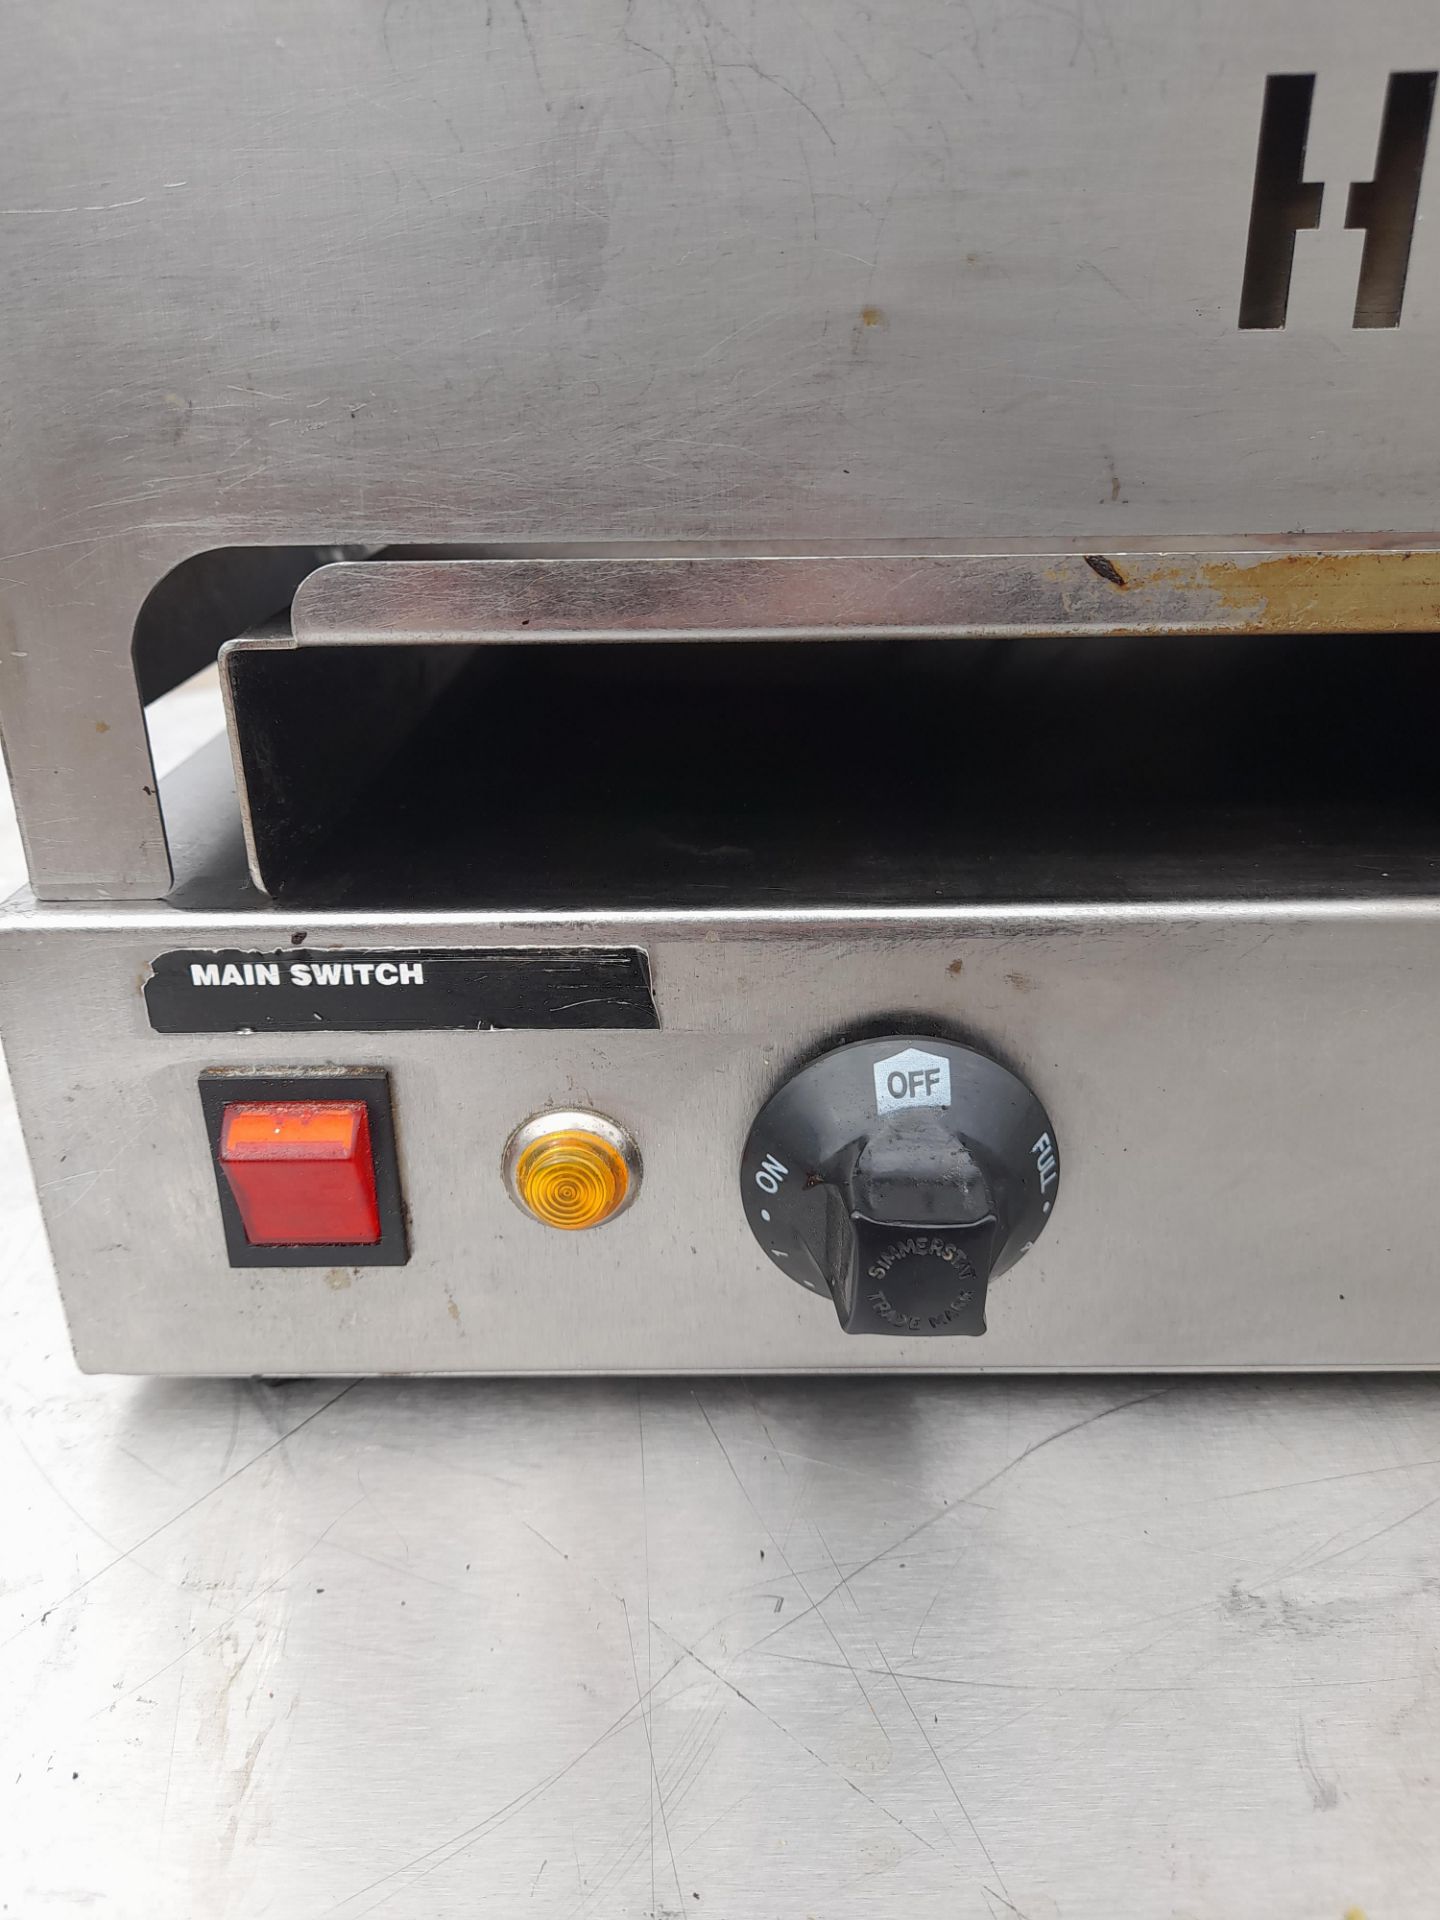 1 x Pizza Cappa Shrink Wrapping Machine - Model PC2000 - Stainless Steel - RRP £560 - Image 6 of 9